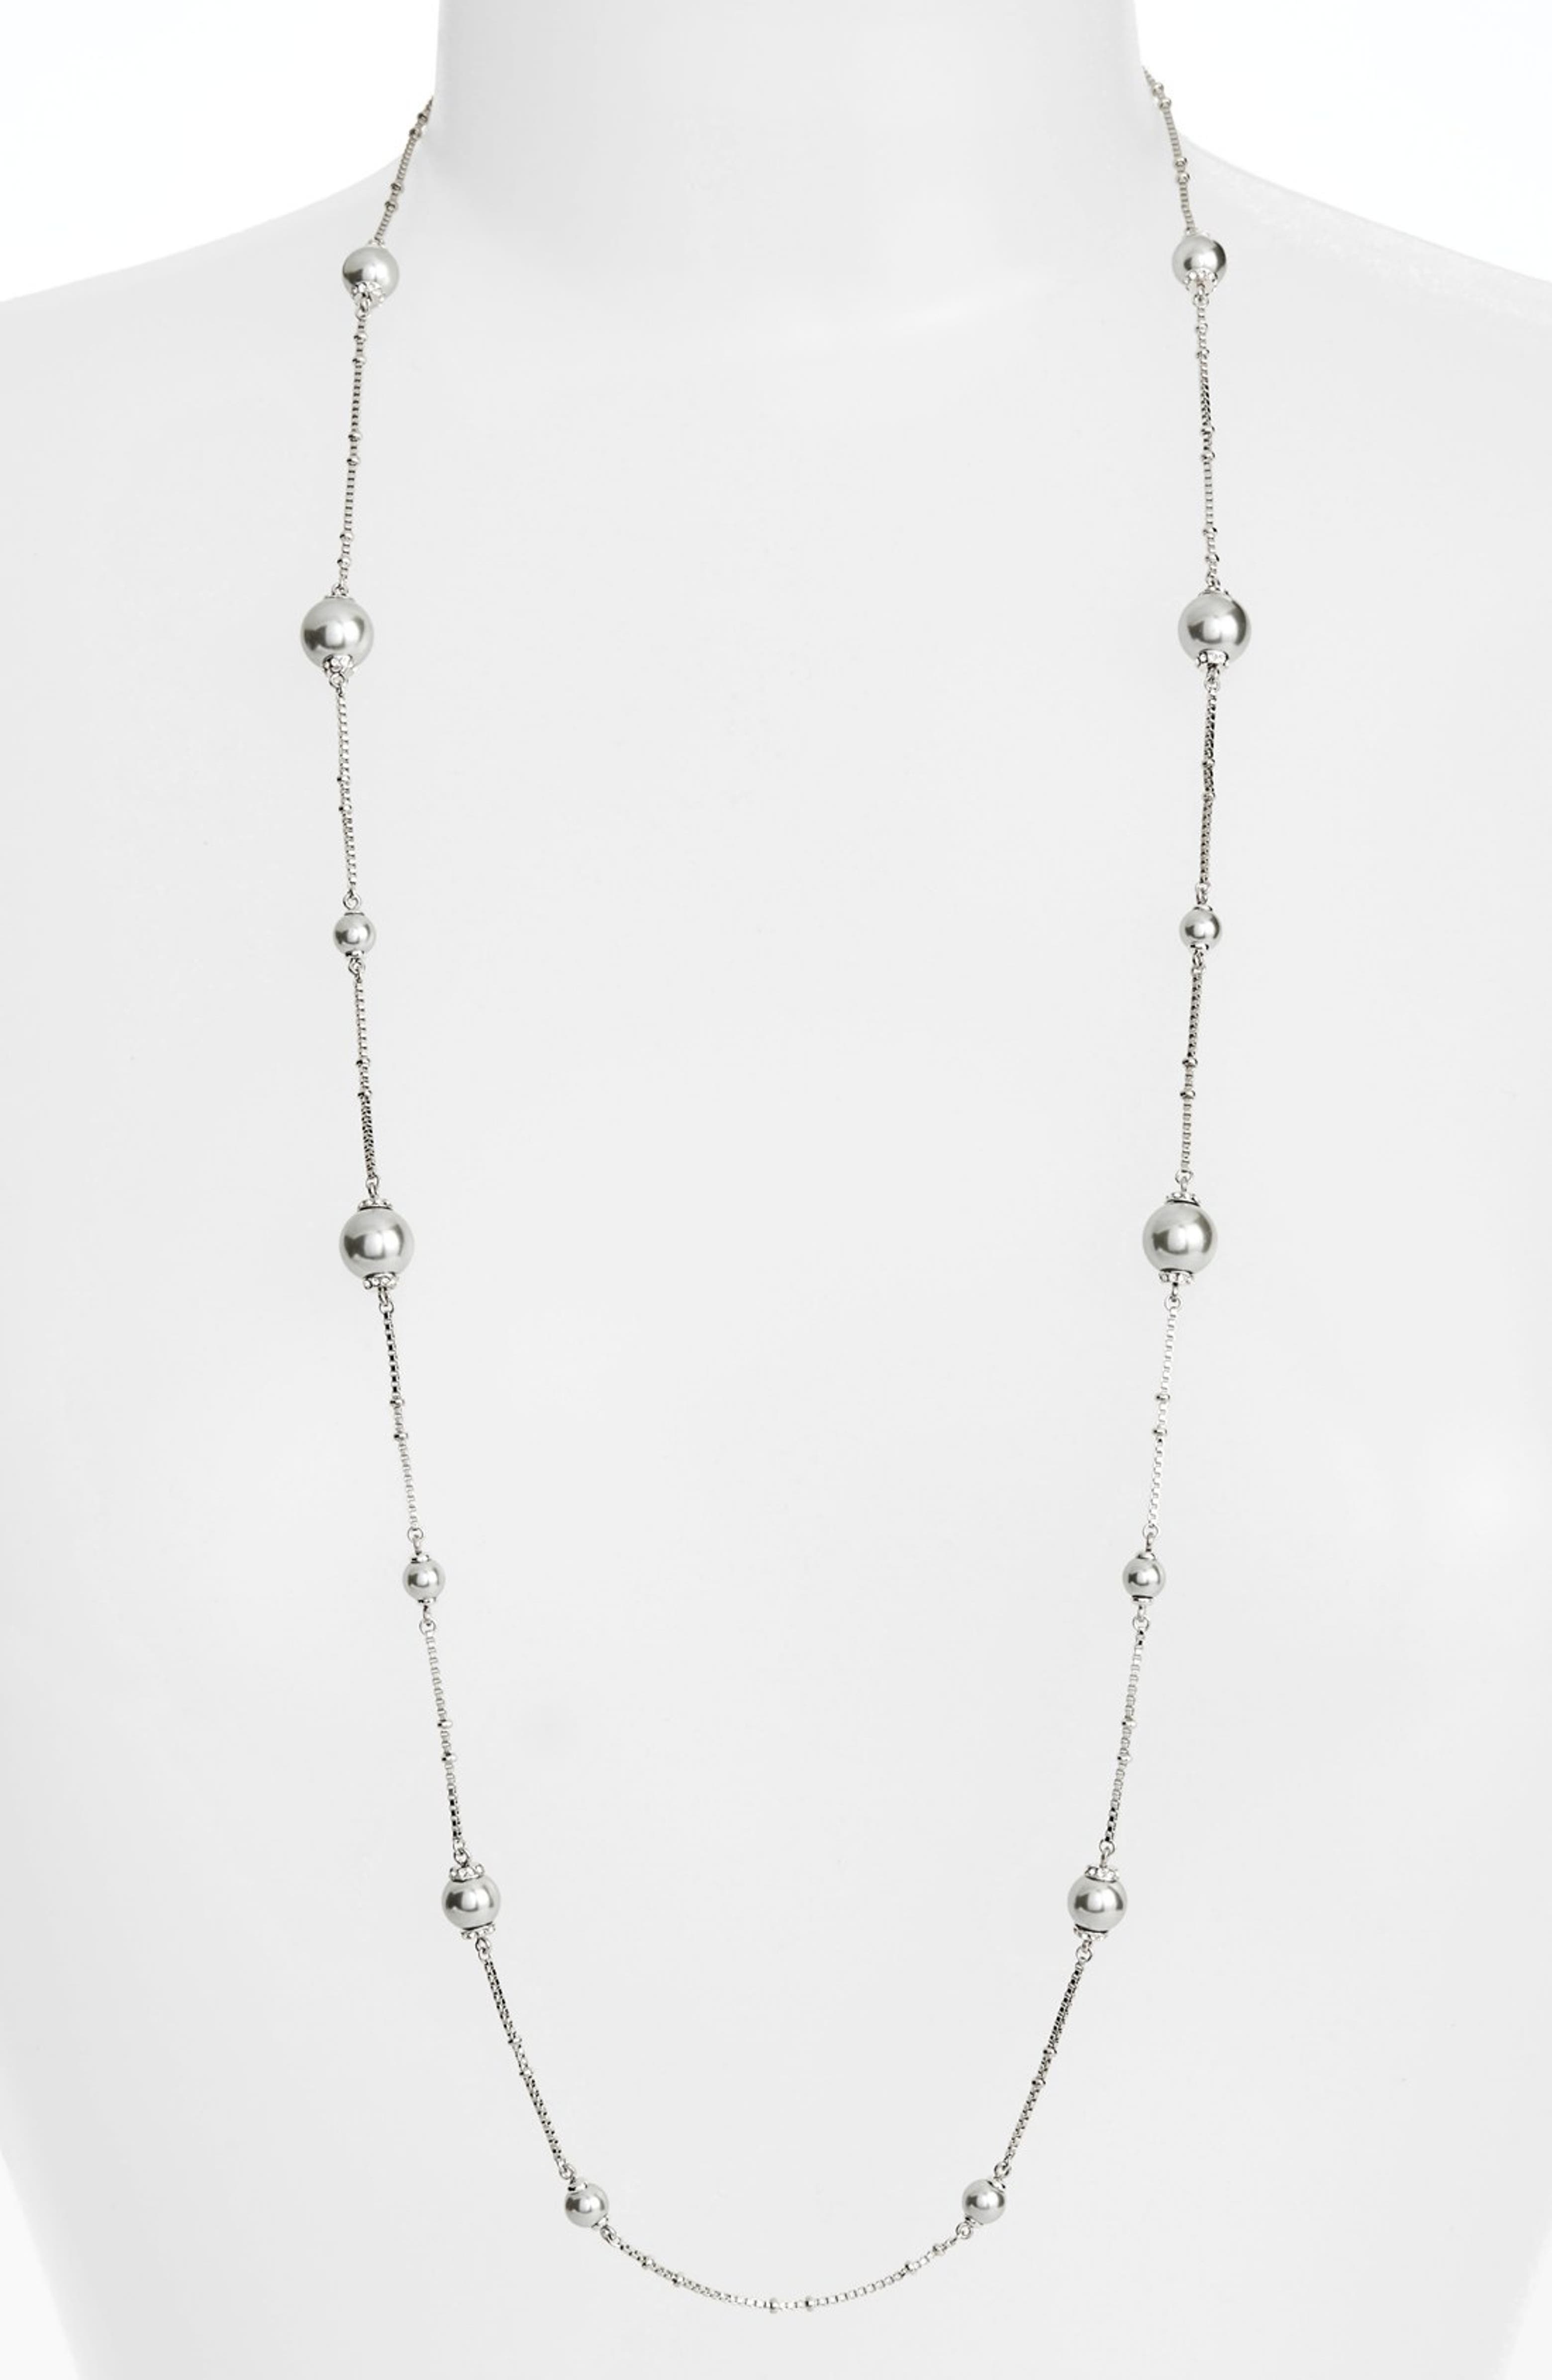 kate spade new york 'pearls of wisdom' long station necklace | Nordstrom